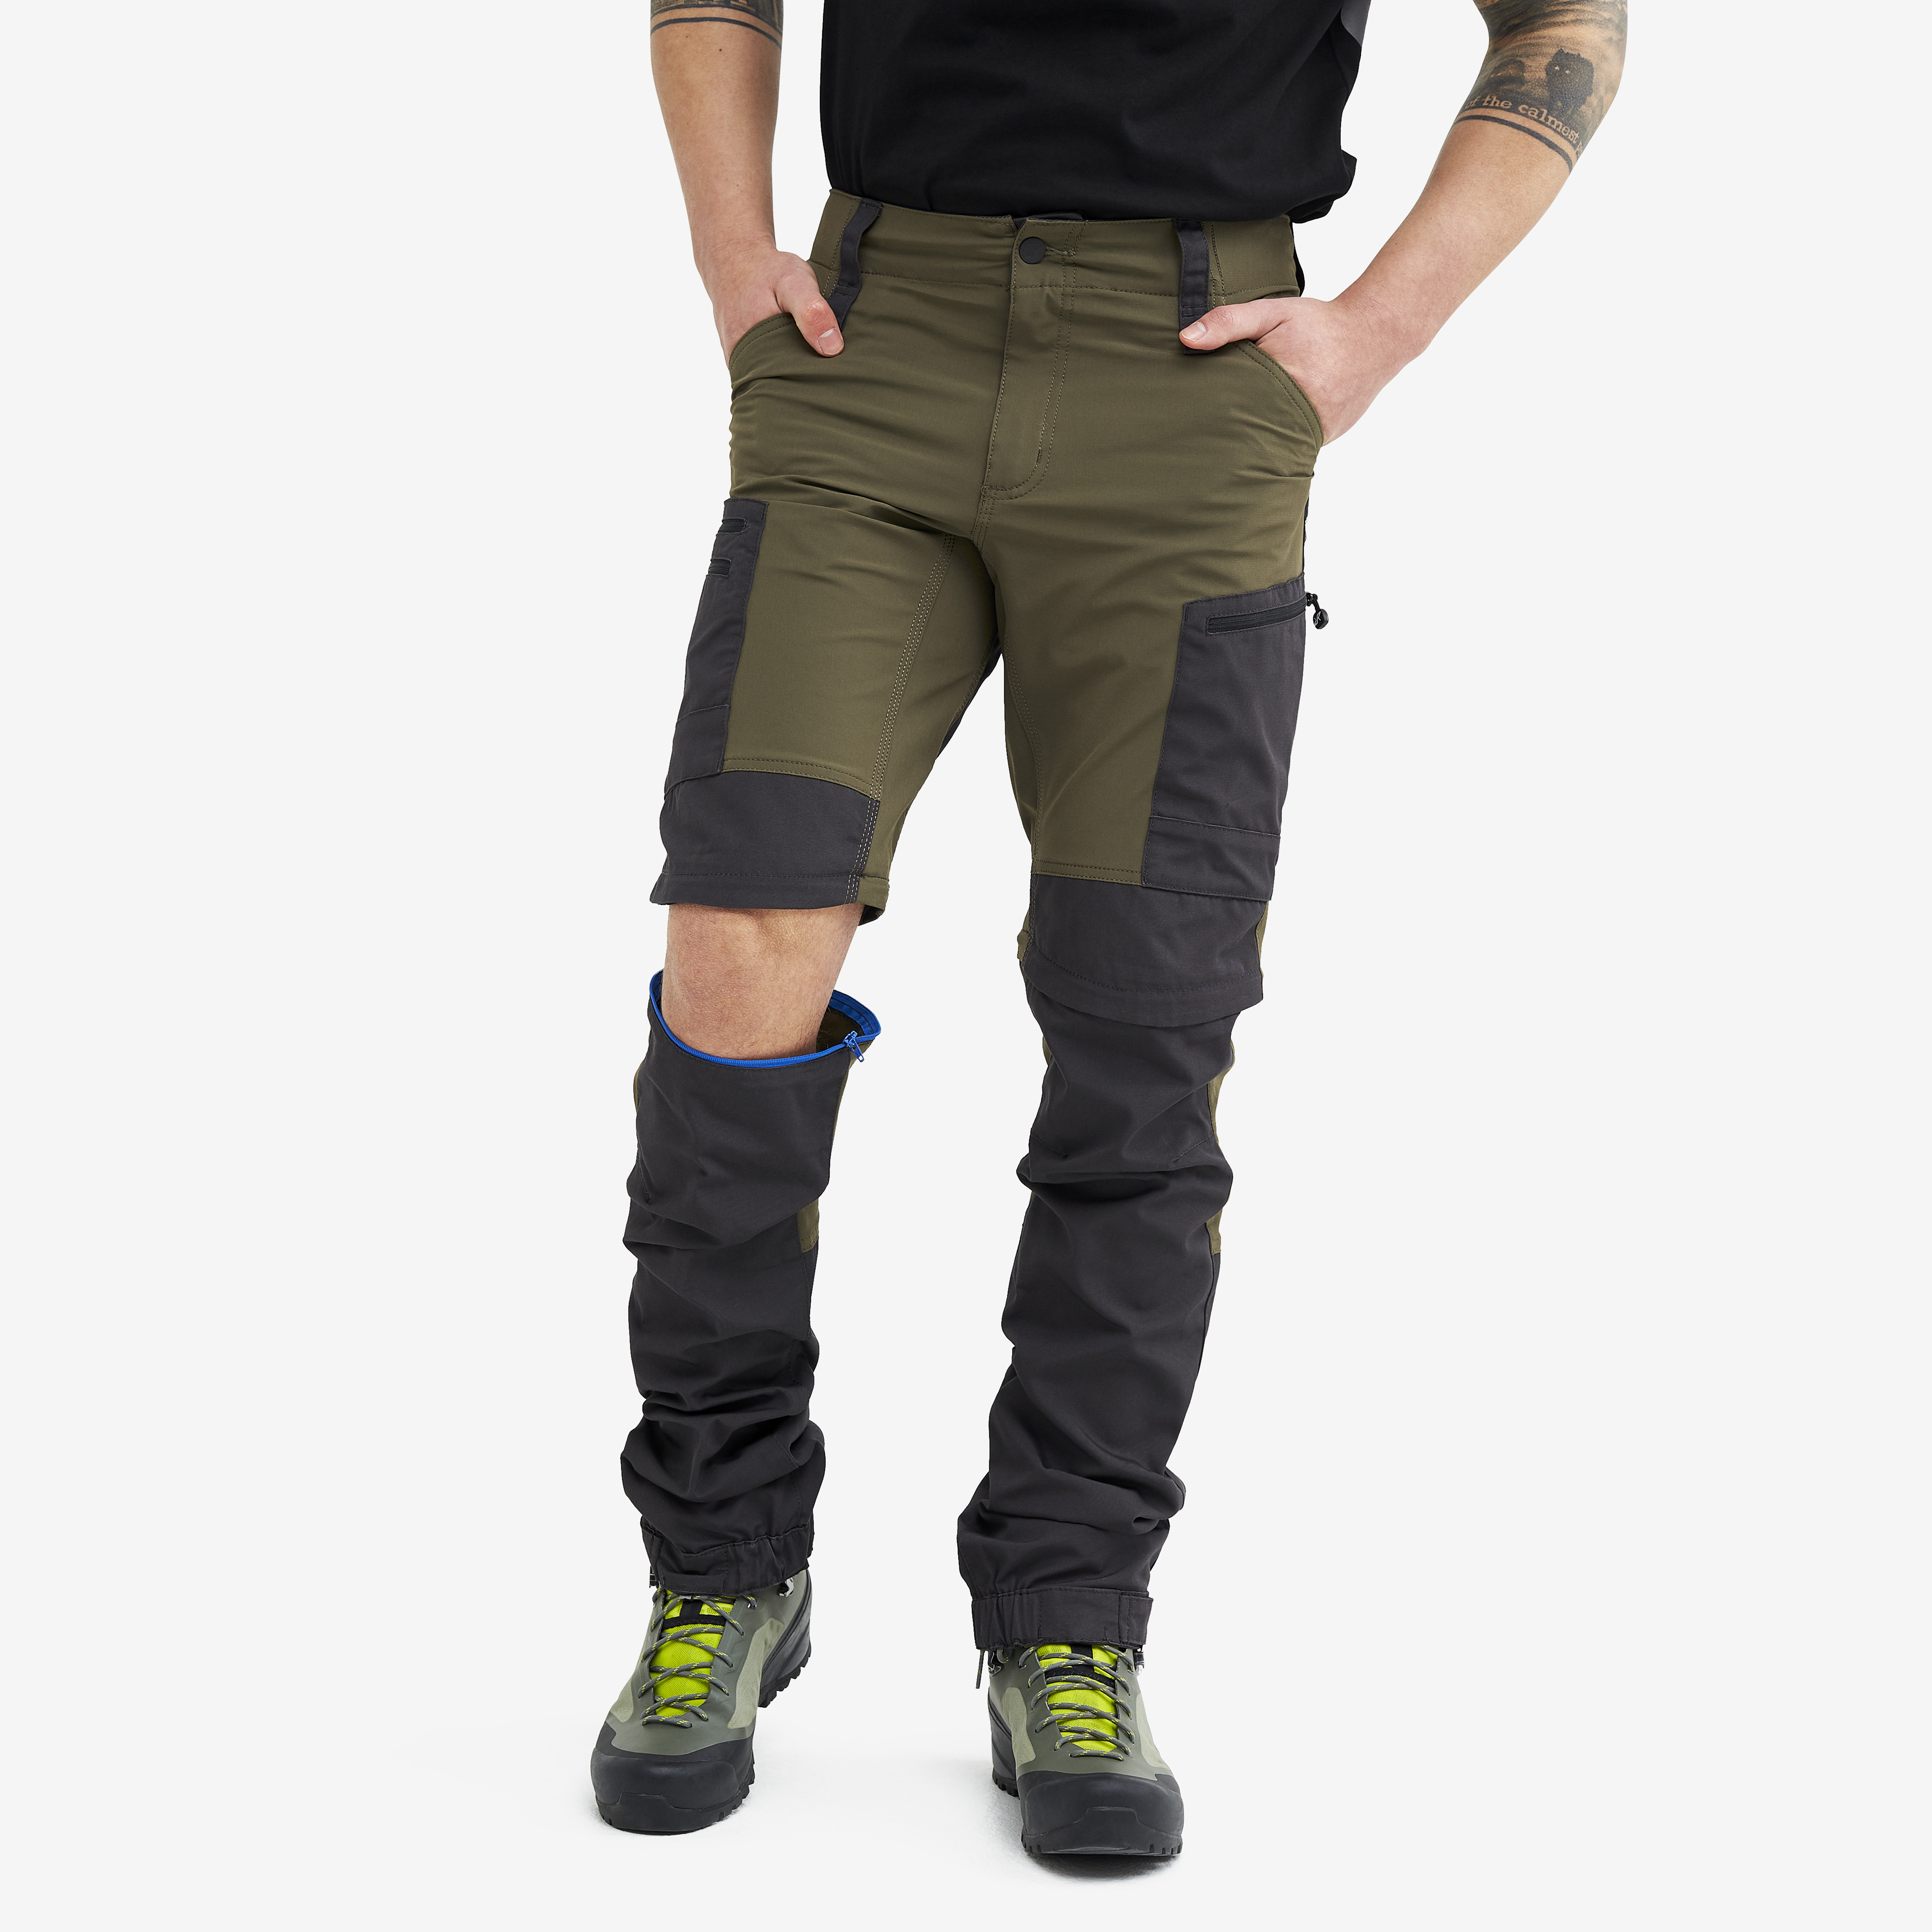 RVRC GP Pro Zip-off hiking trousers for men in green